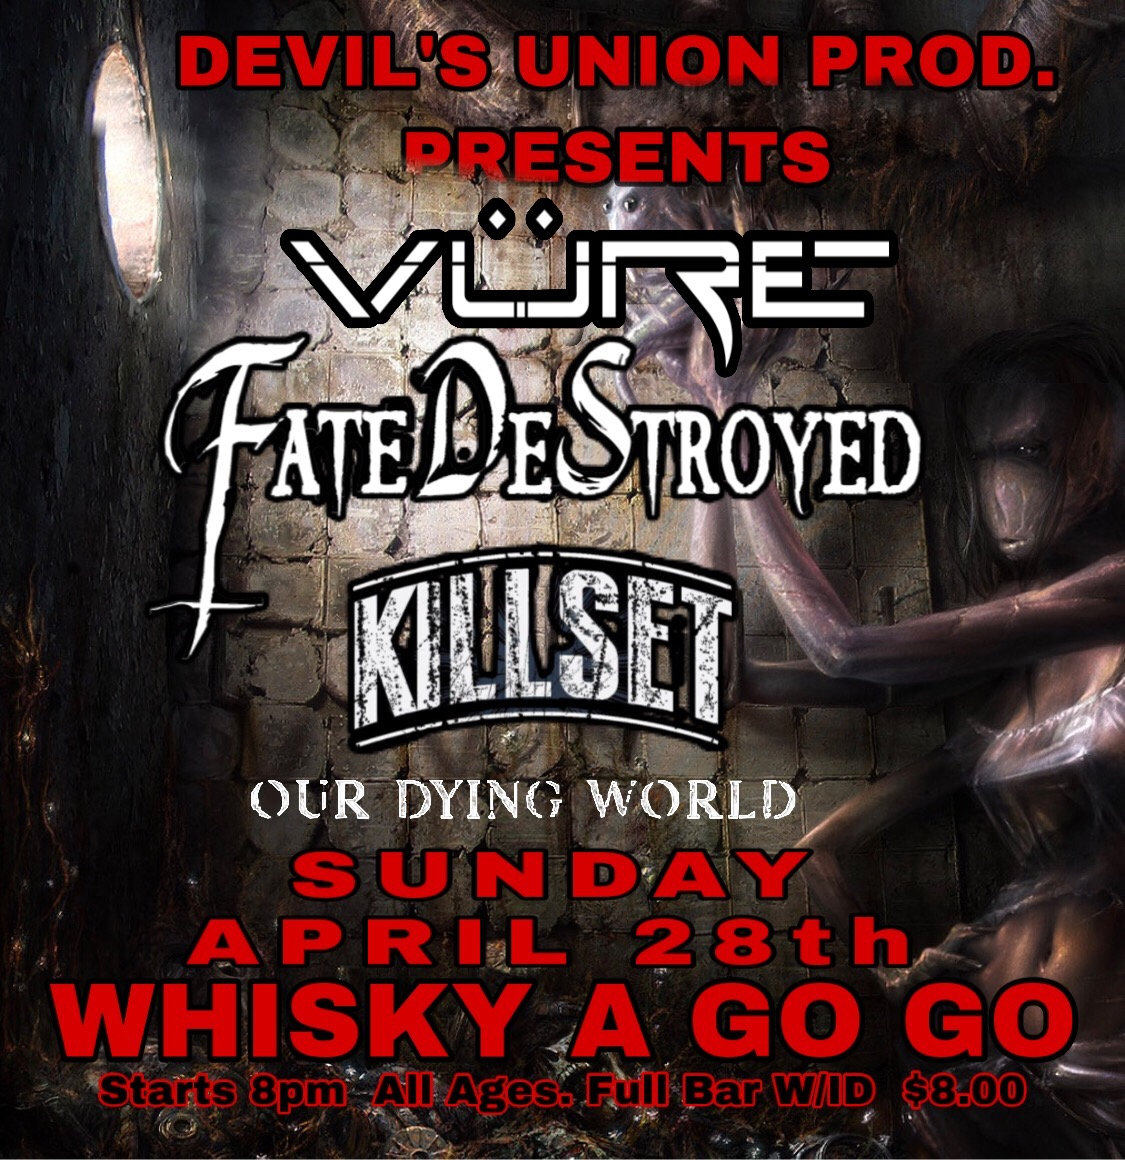 Vure, Fate Destroyed, Killset, Our Dying World